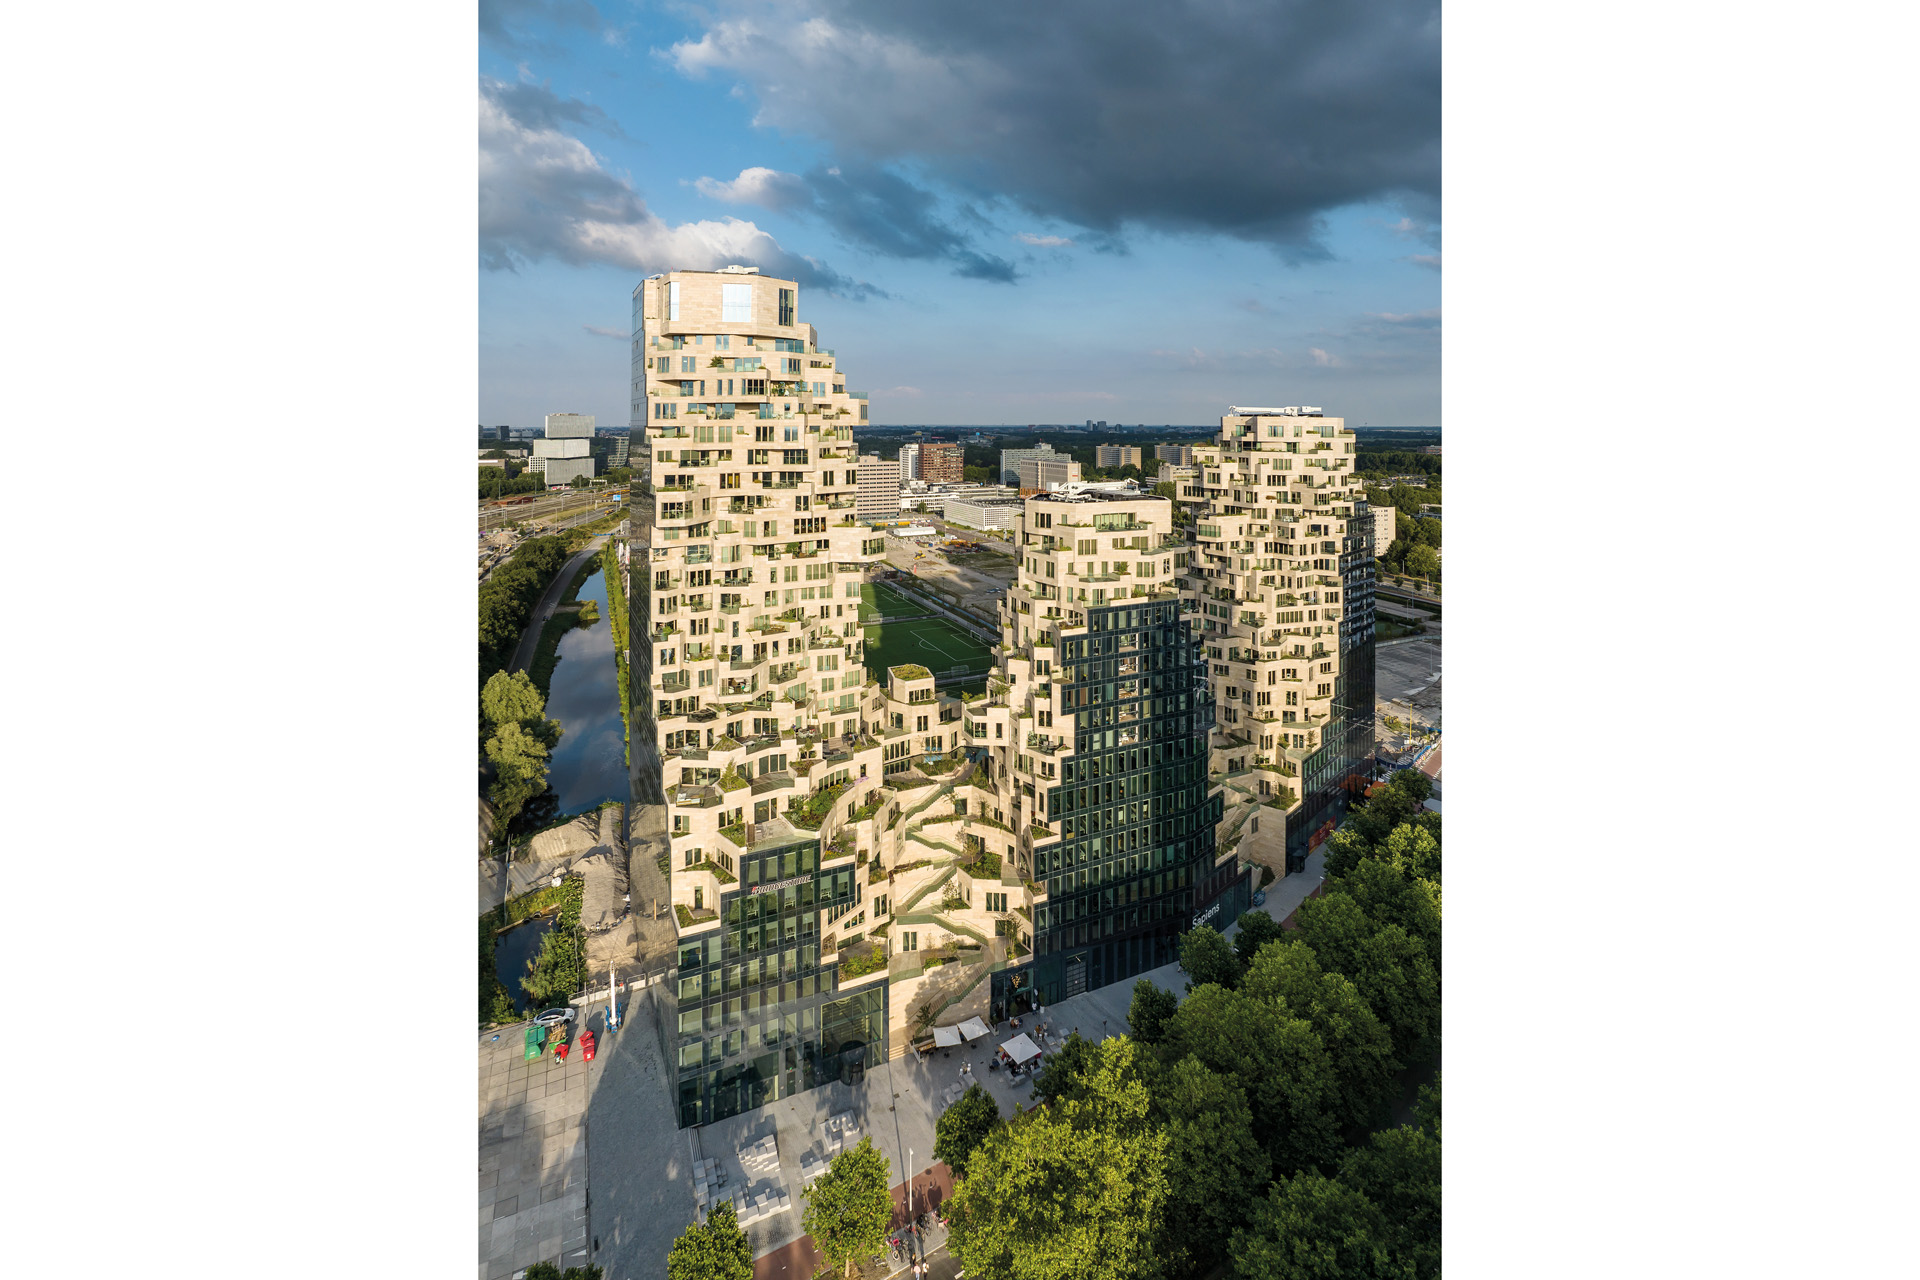 Amsterdam’s new, plant- covered Valley building